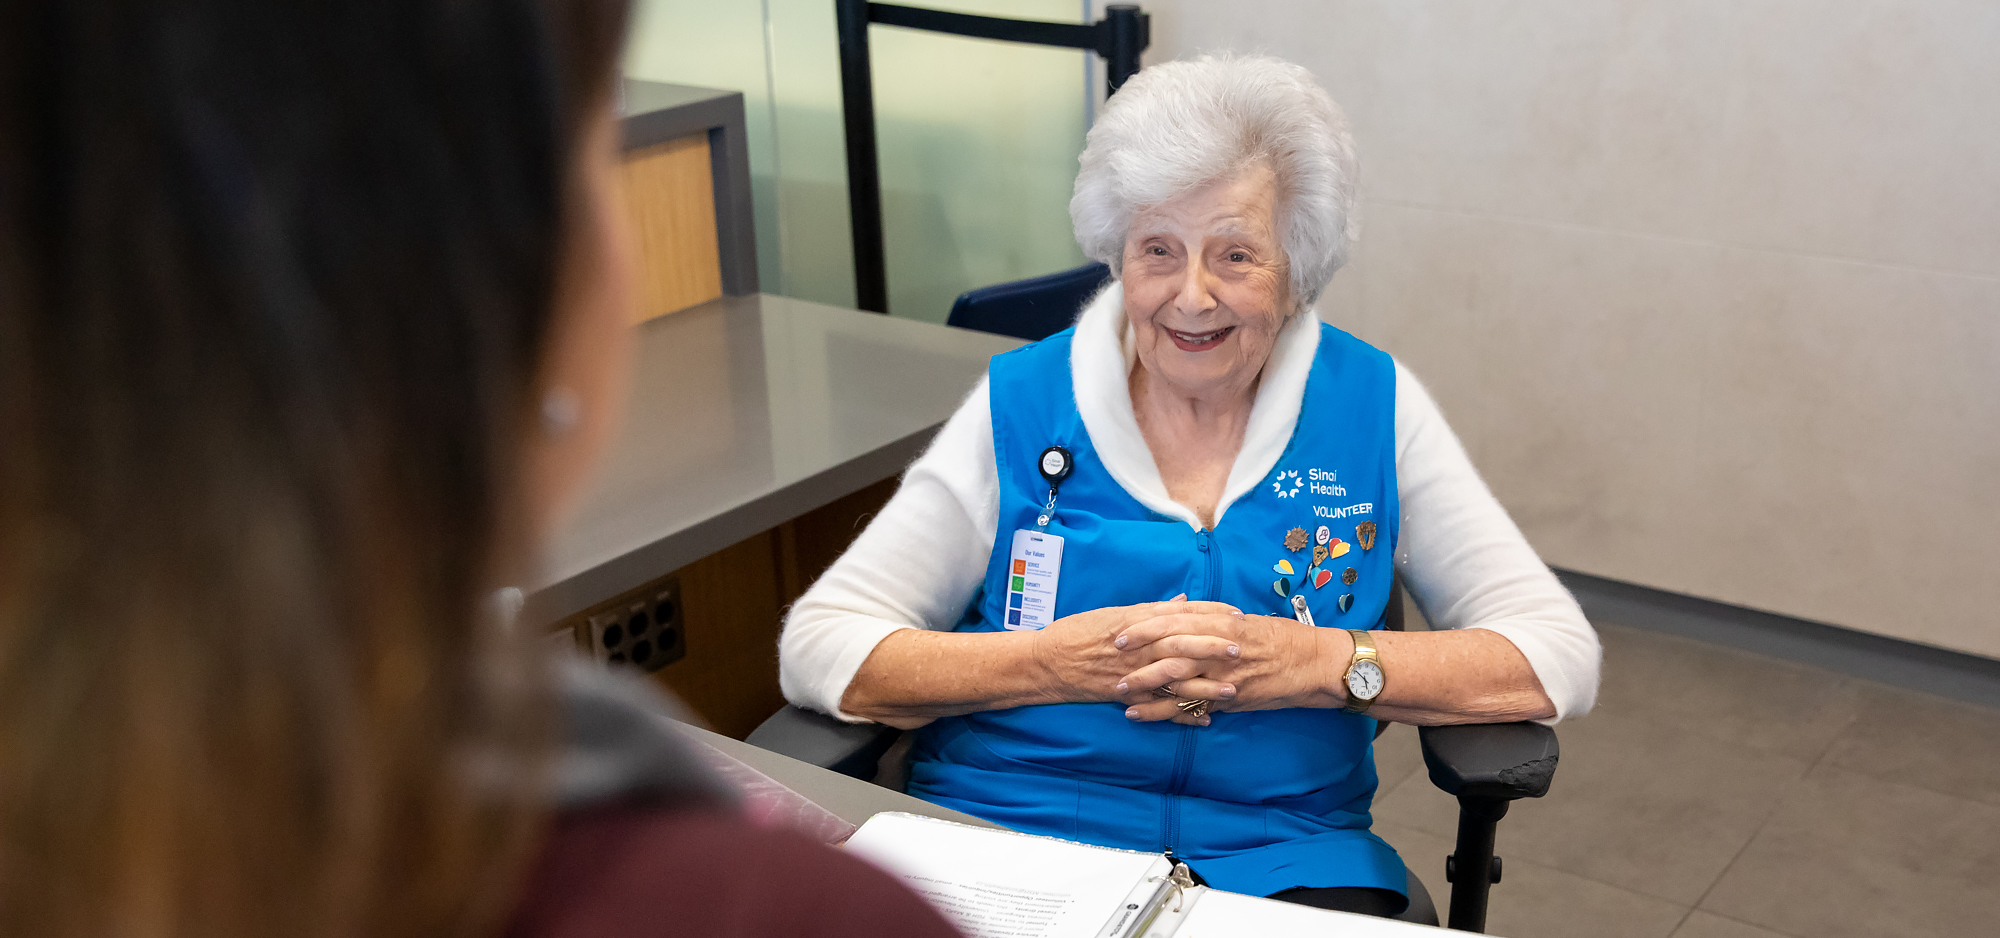 Life’s second act: A 95-year-young volunteer warms hearts and newborn heads at Mount Sinai Hospital